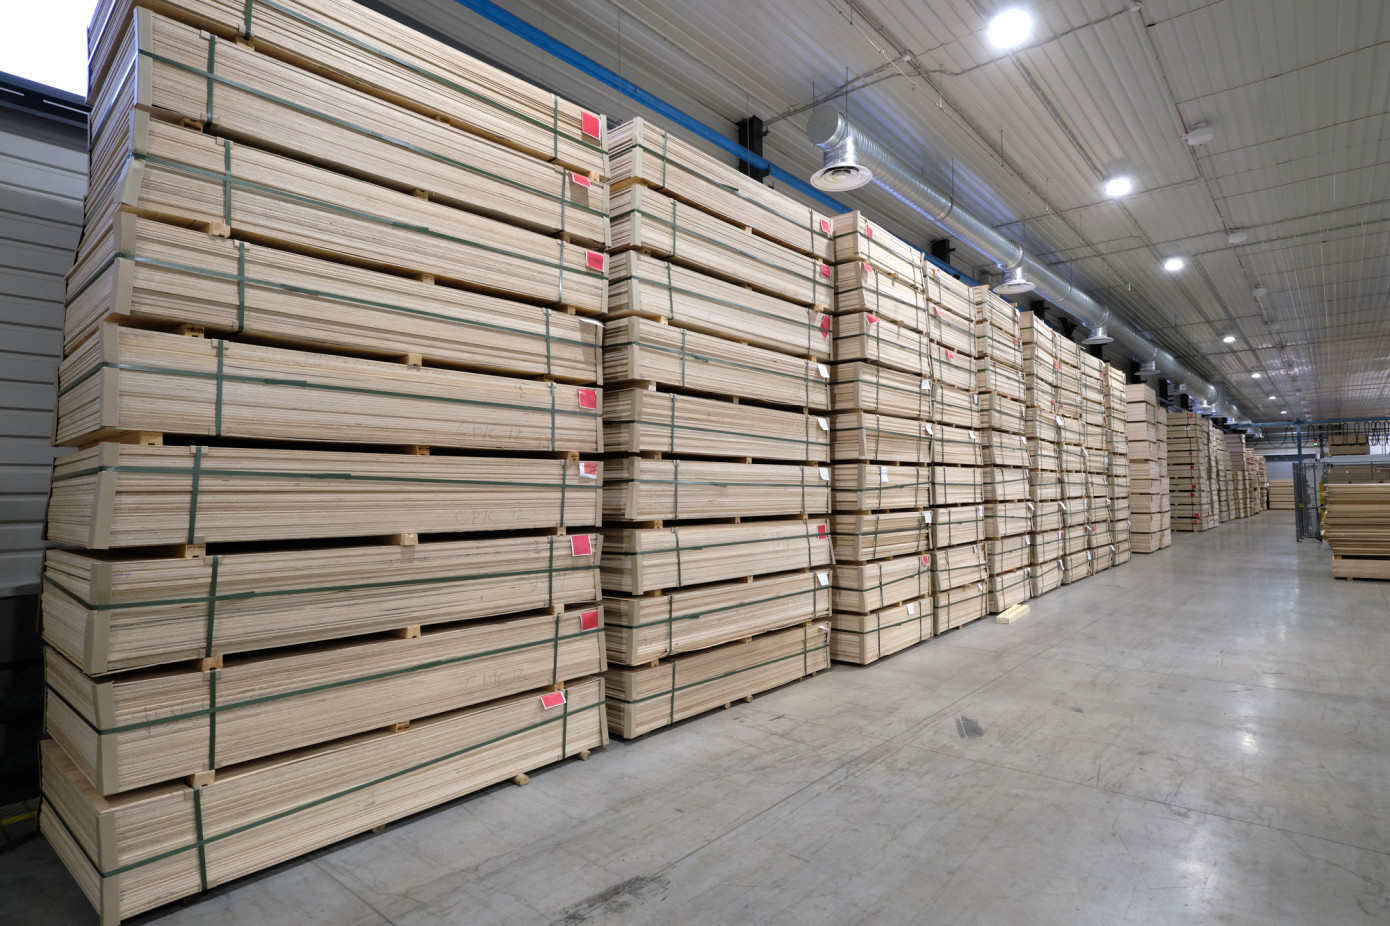 In February, price for plywood imported to Japan up 2%